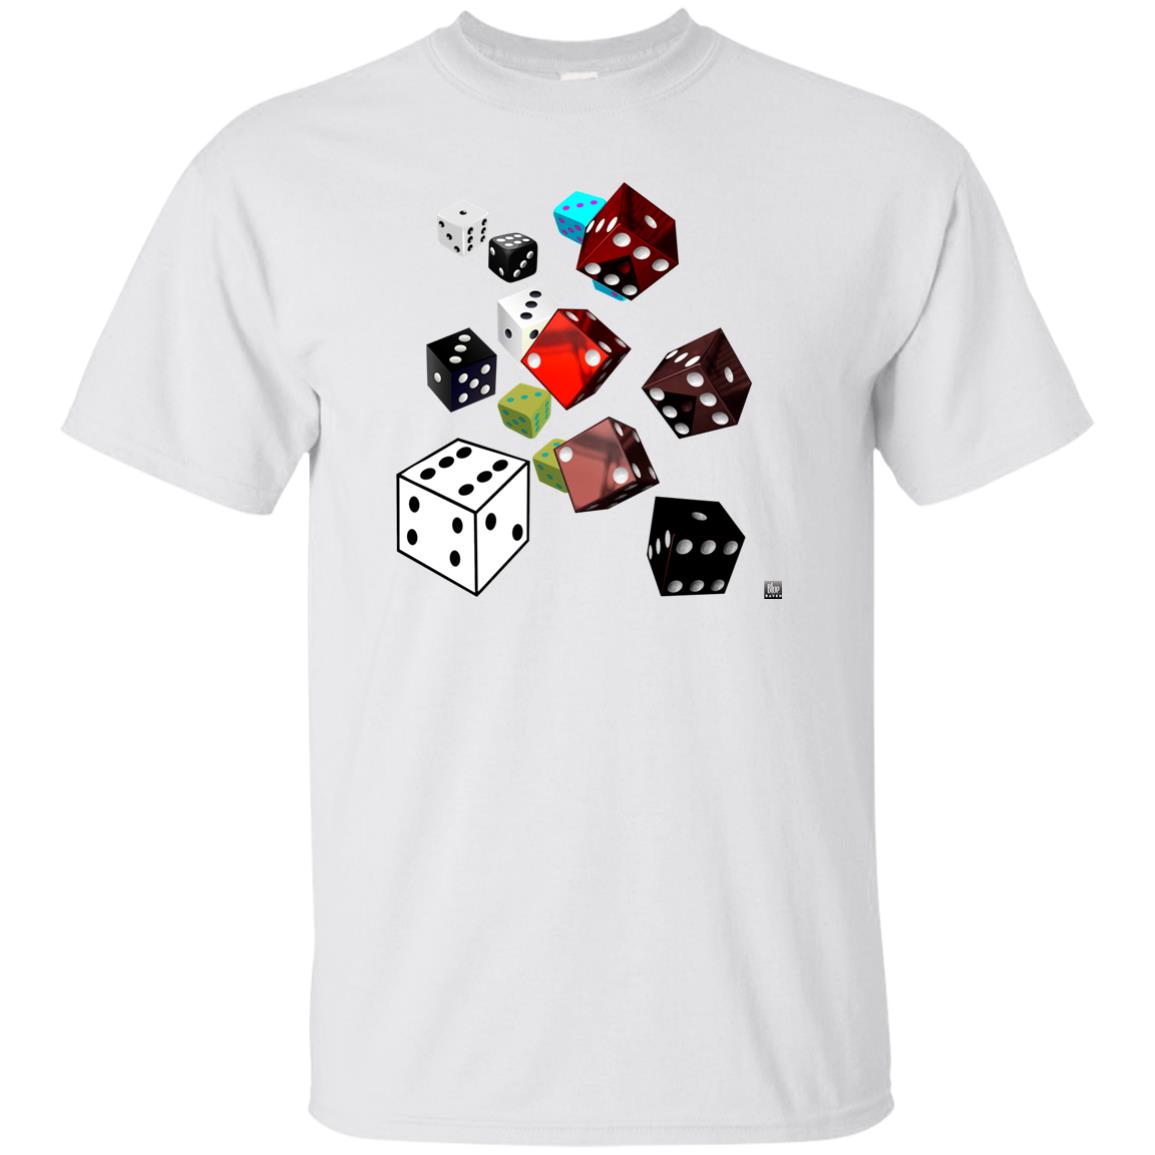 roll of the dice - Men's Classic Fit T-Shirt